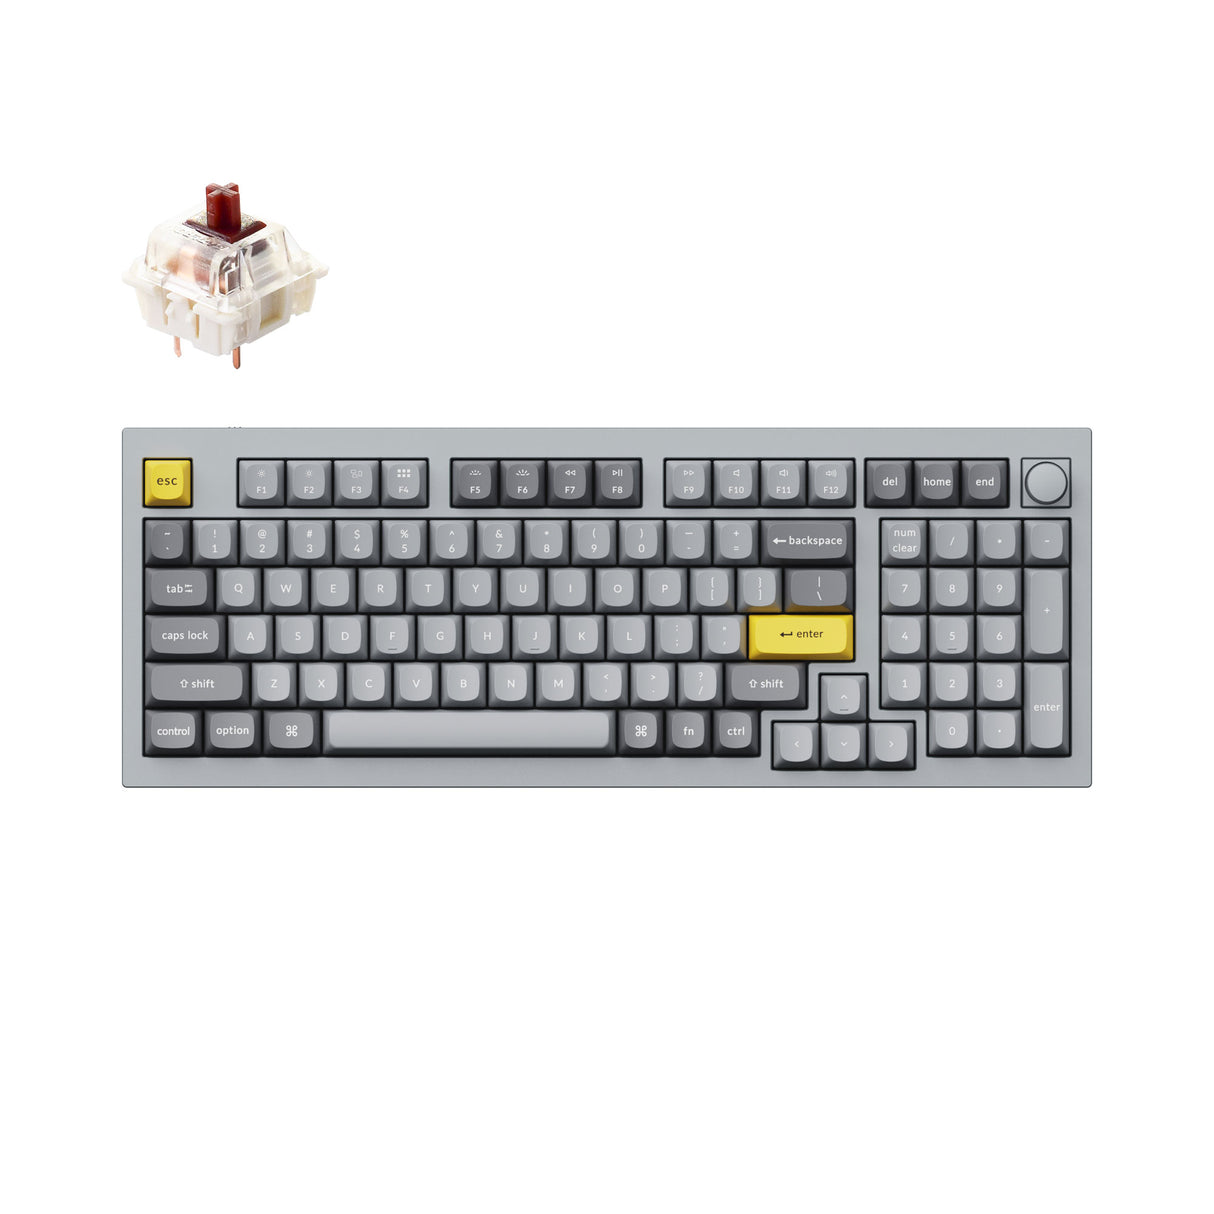 Keychron Q5 QMK VIA custom mechanical keyboard 1800 compact 96 percent layout full aluminum grey frame knob for Mac Windows RGB backlight with hot swappable Gateron G Pro switch brown